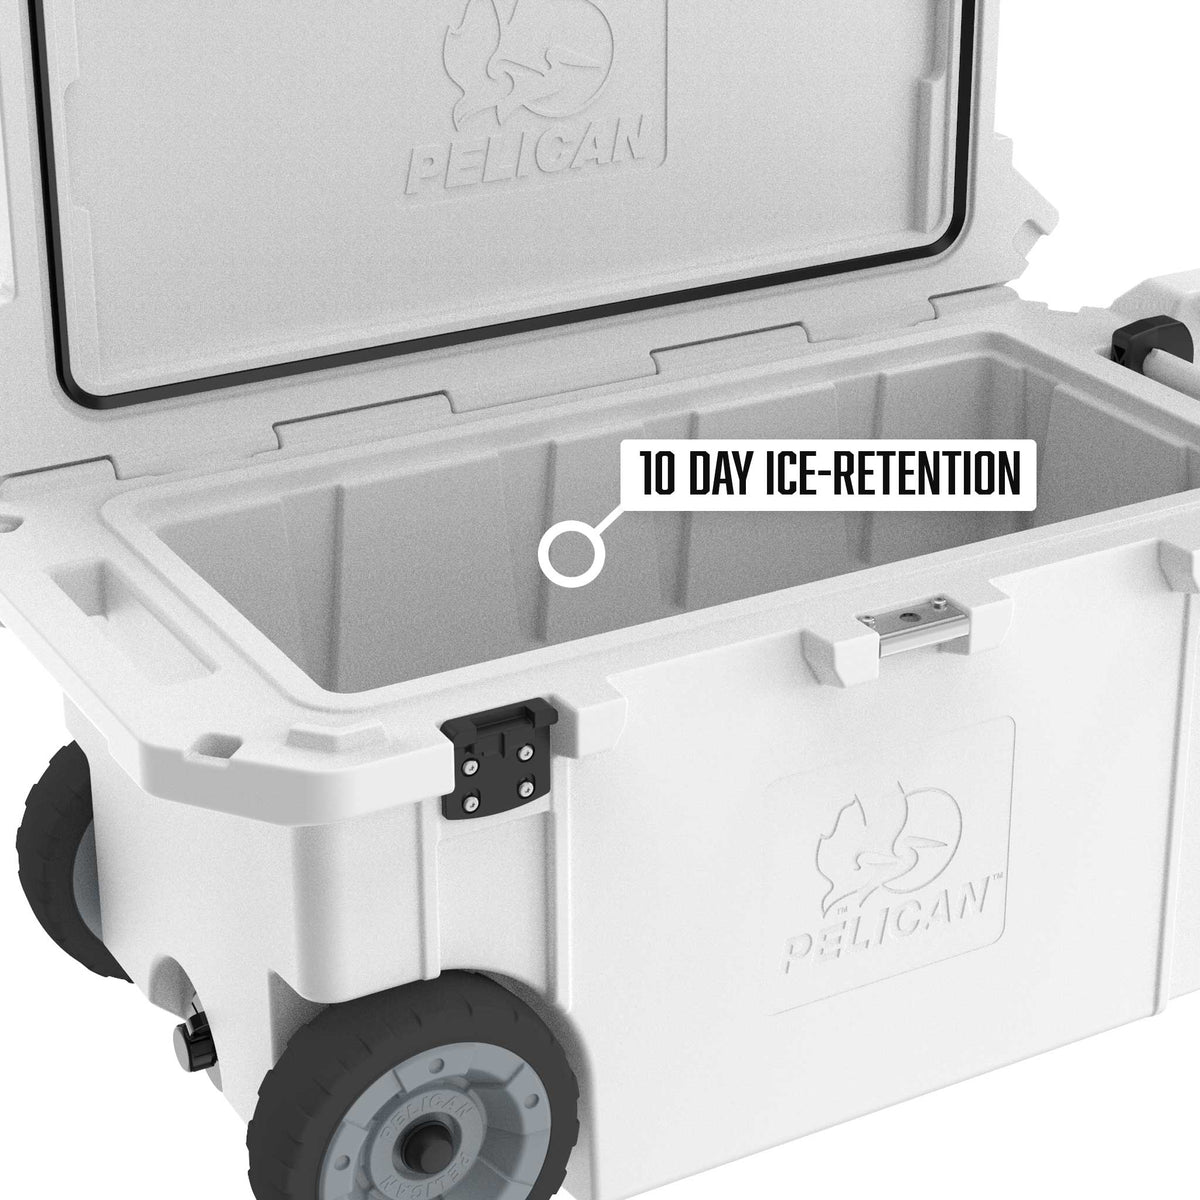 Pelican 80QT Elite Wheeled Cooler gets 10 days of ice retention